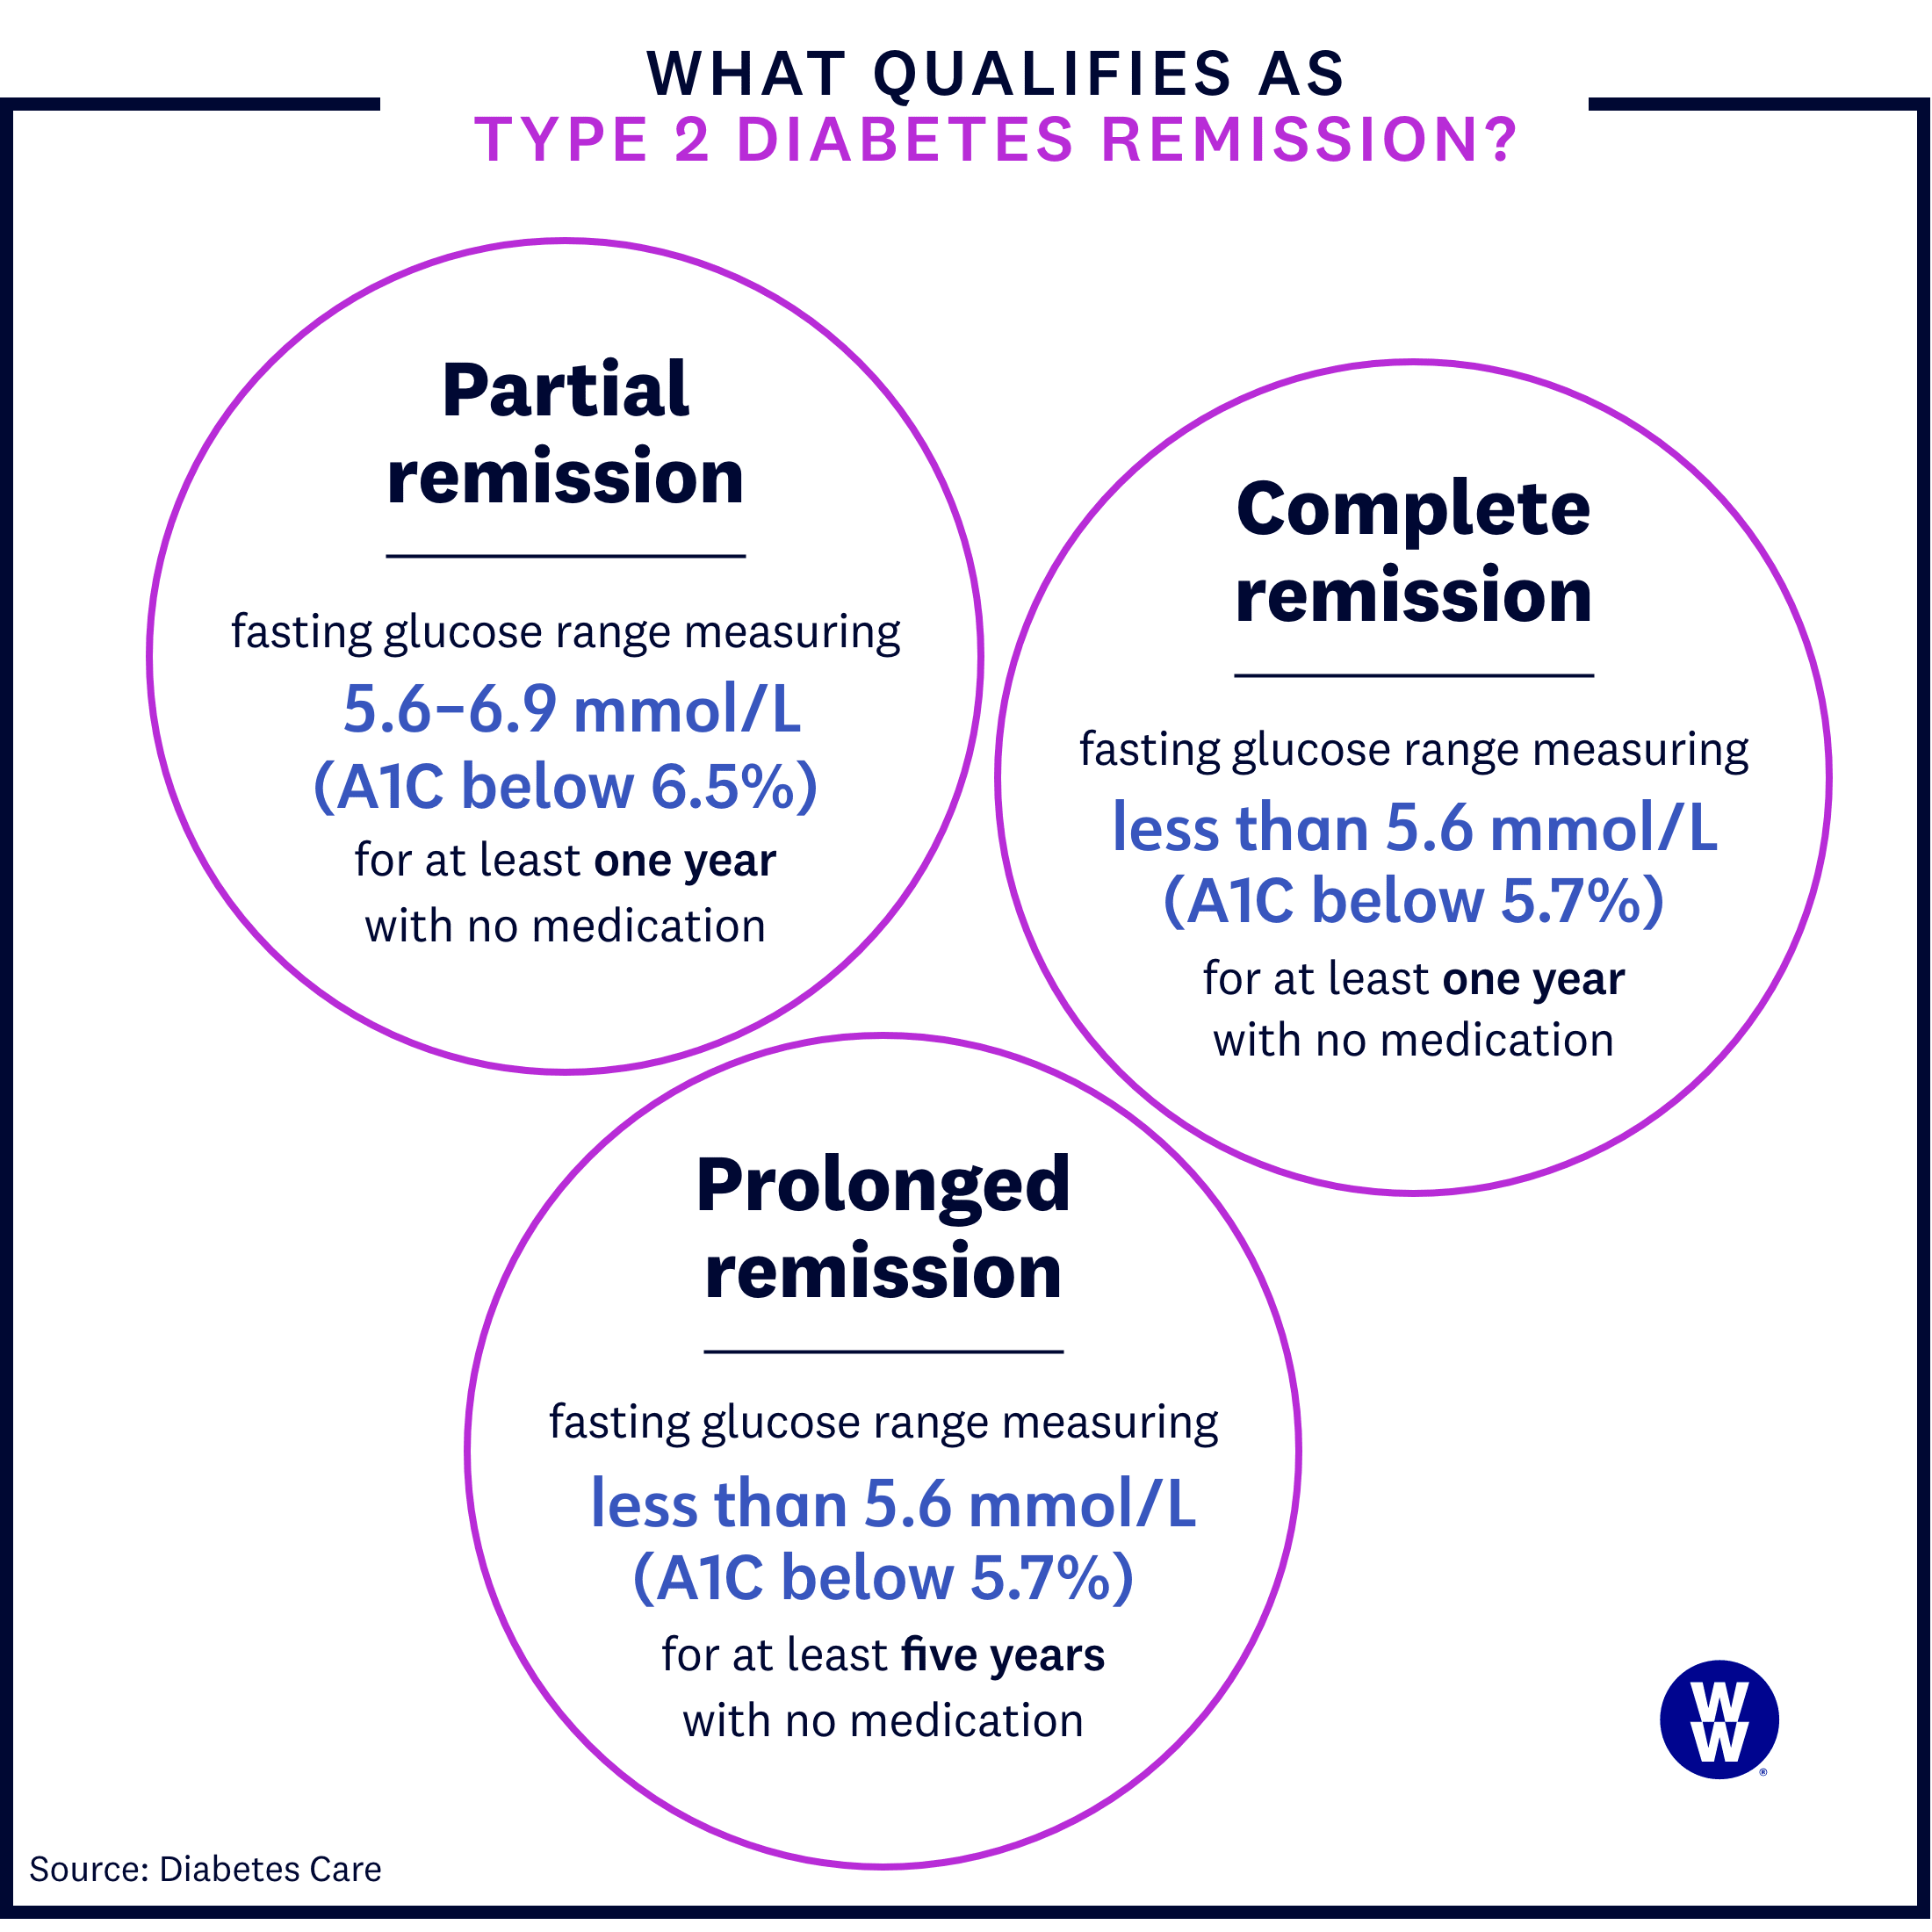 What qualifies as type 2 diabetes remission